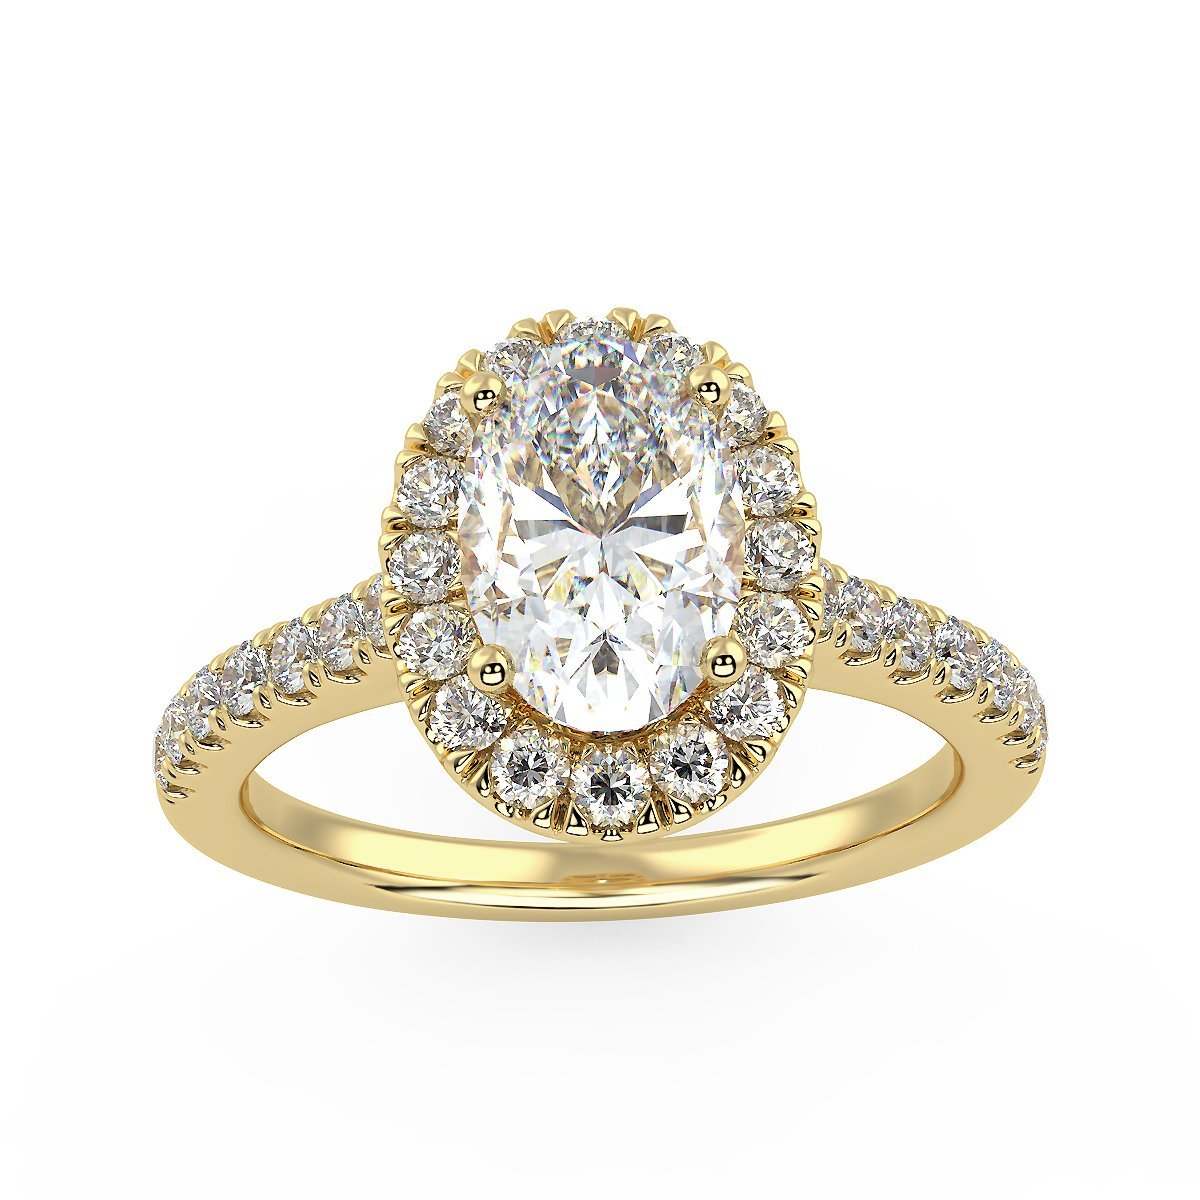 Ellipse Engagement Ring in Yellow Gold